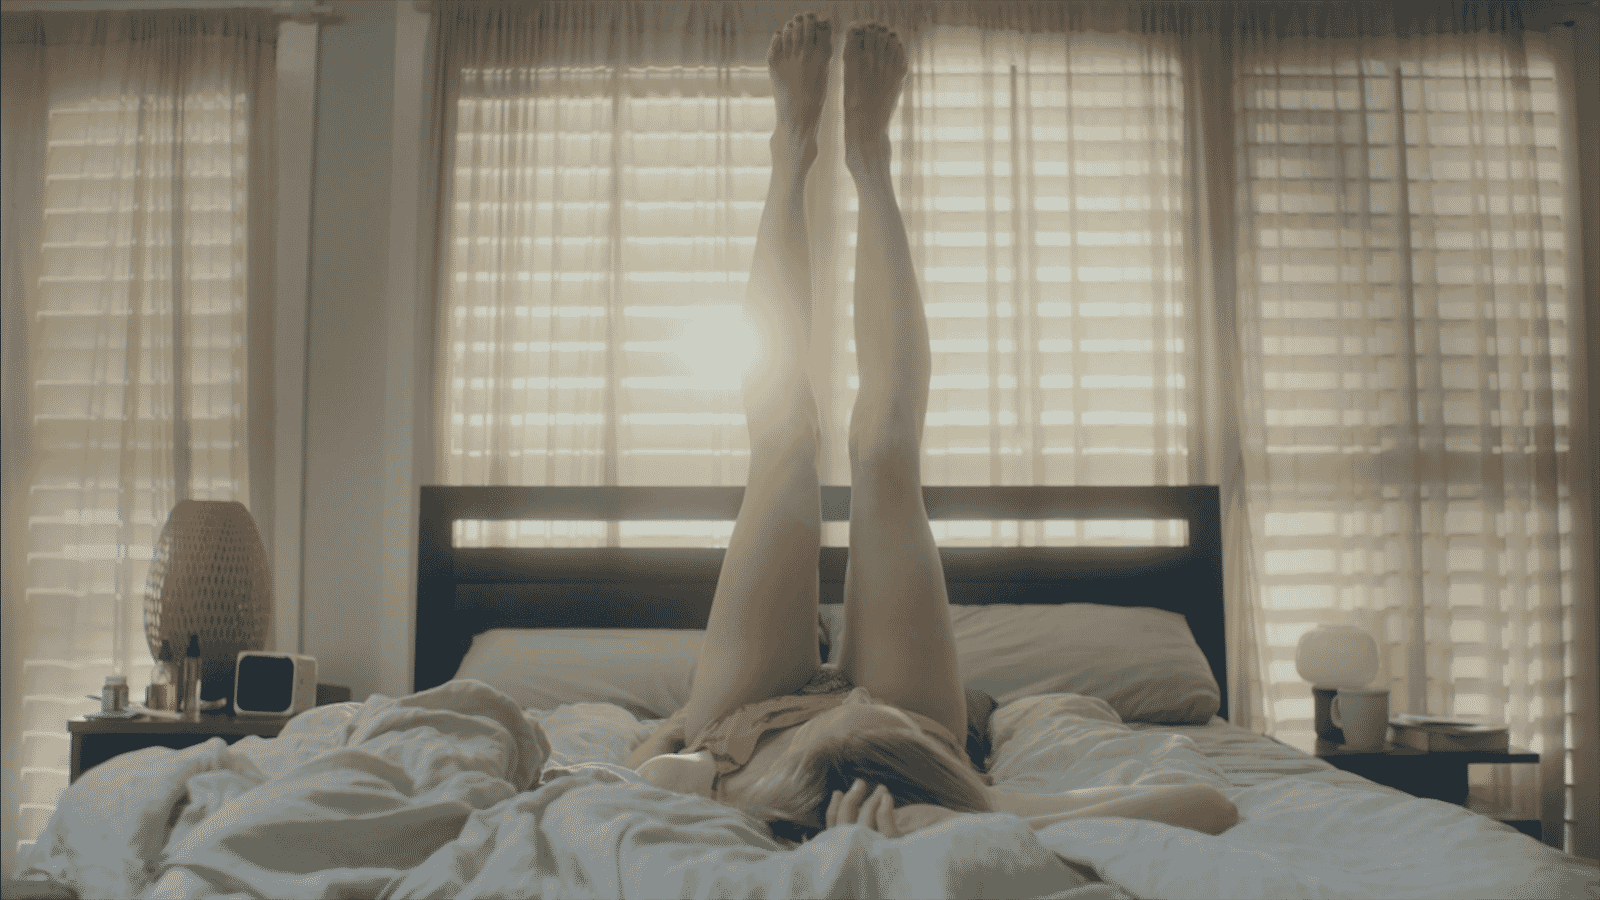 woman post-coital with her legs up trying to conceive